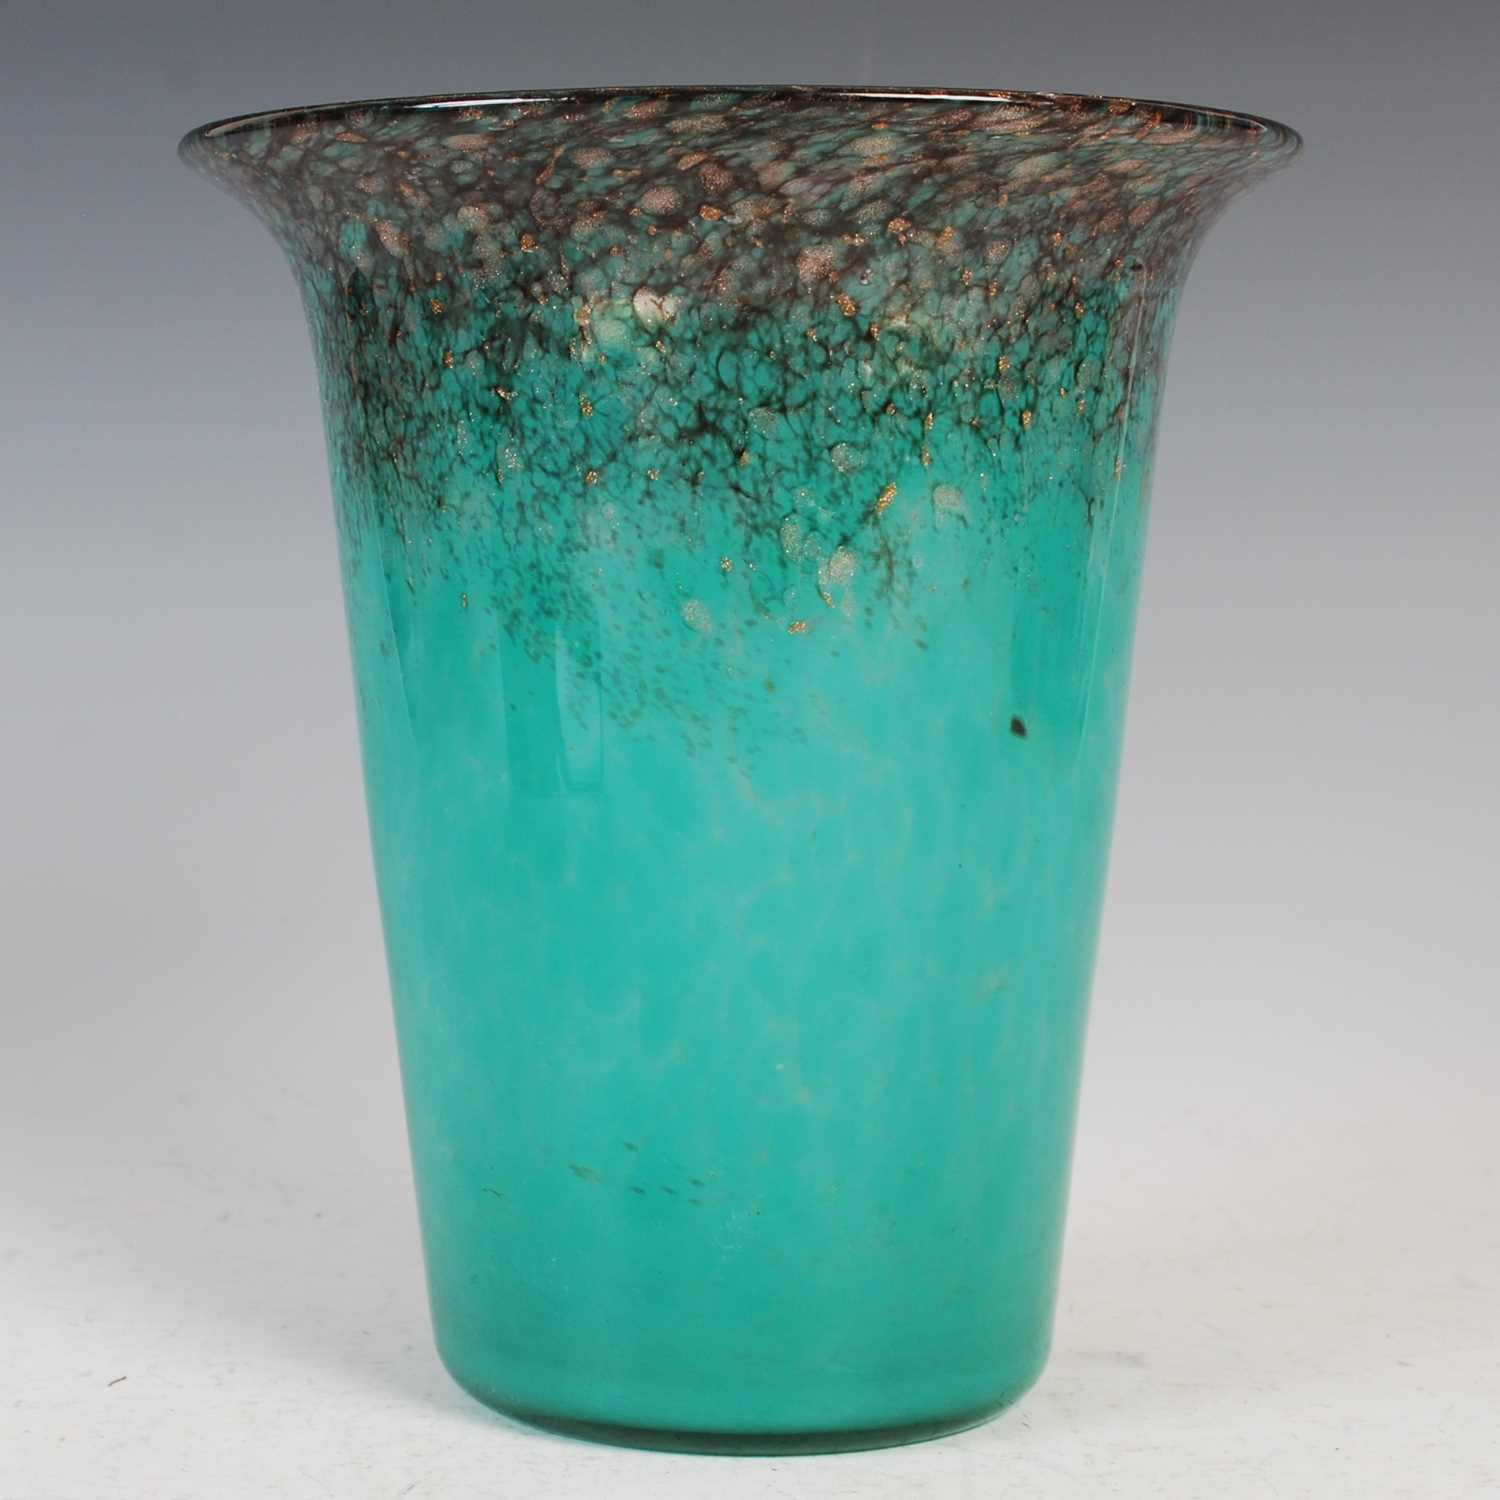 A Monart vase, probably shape PG, mottled black and green with gold-coloured inclusions, 19.5cm - Image 2 of 6